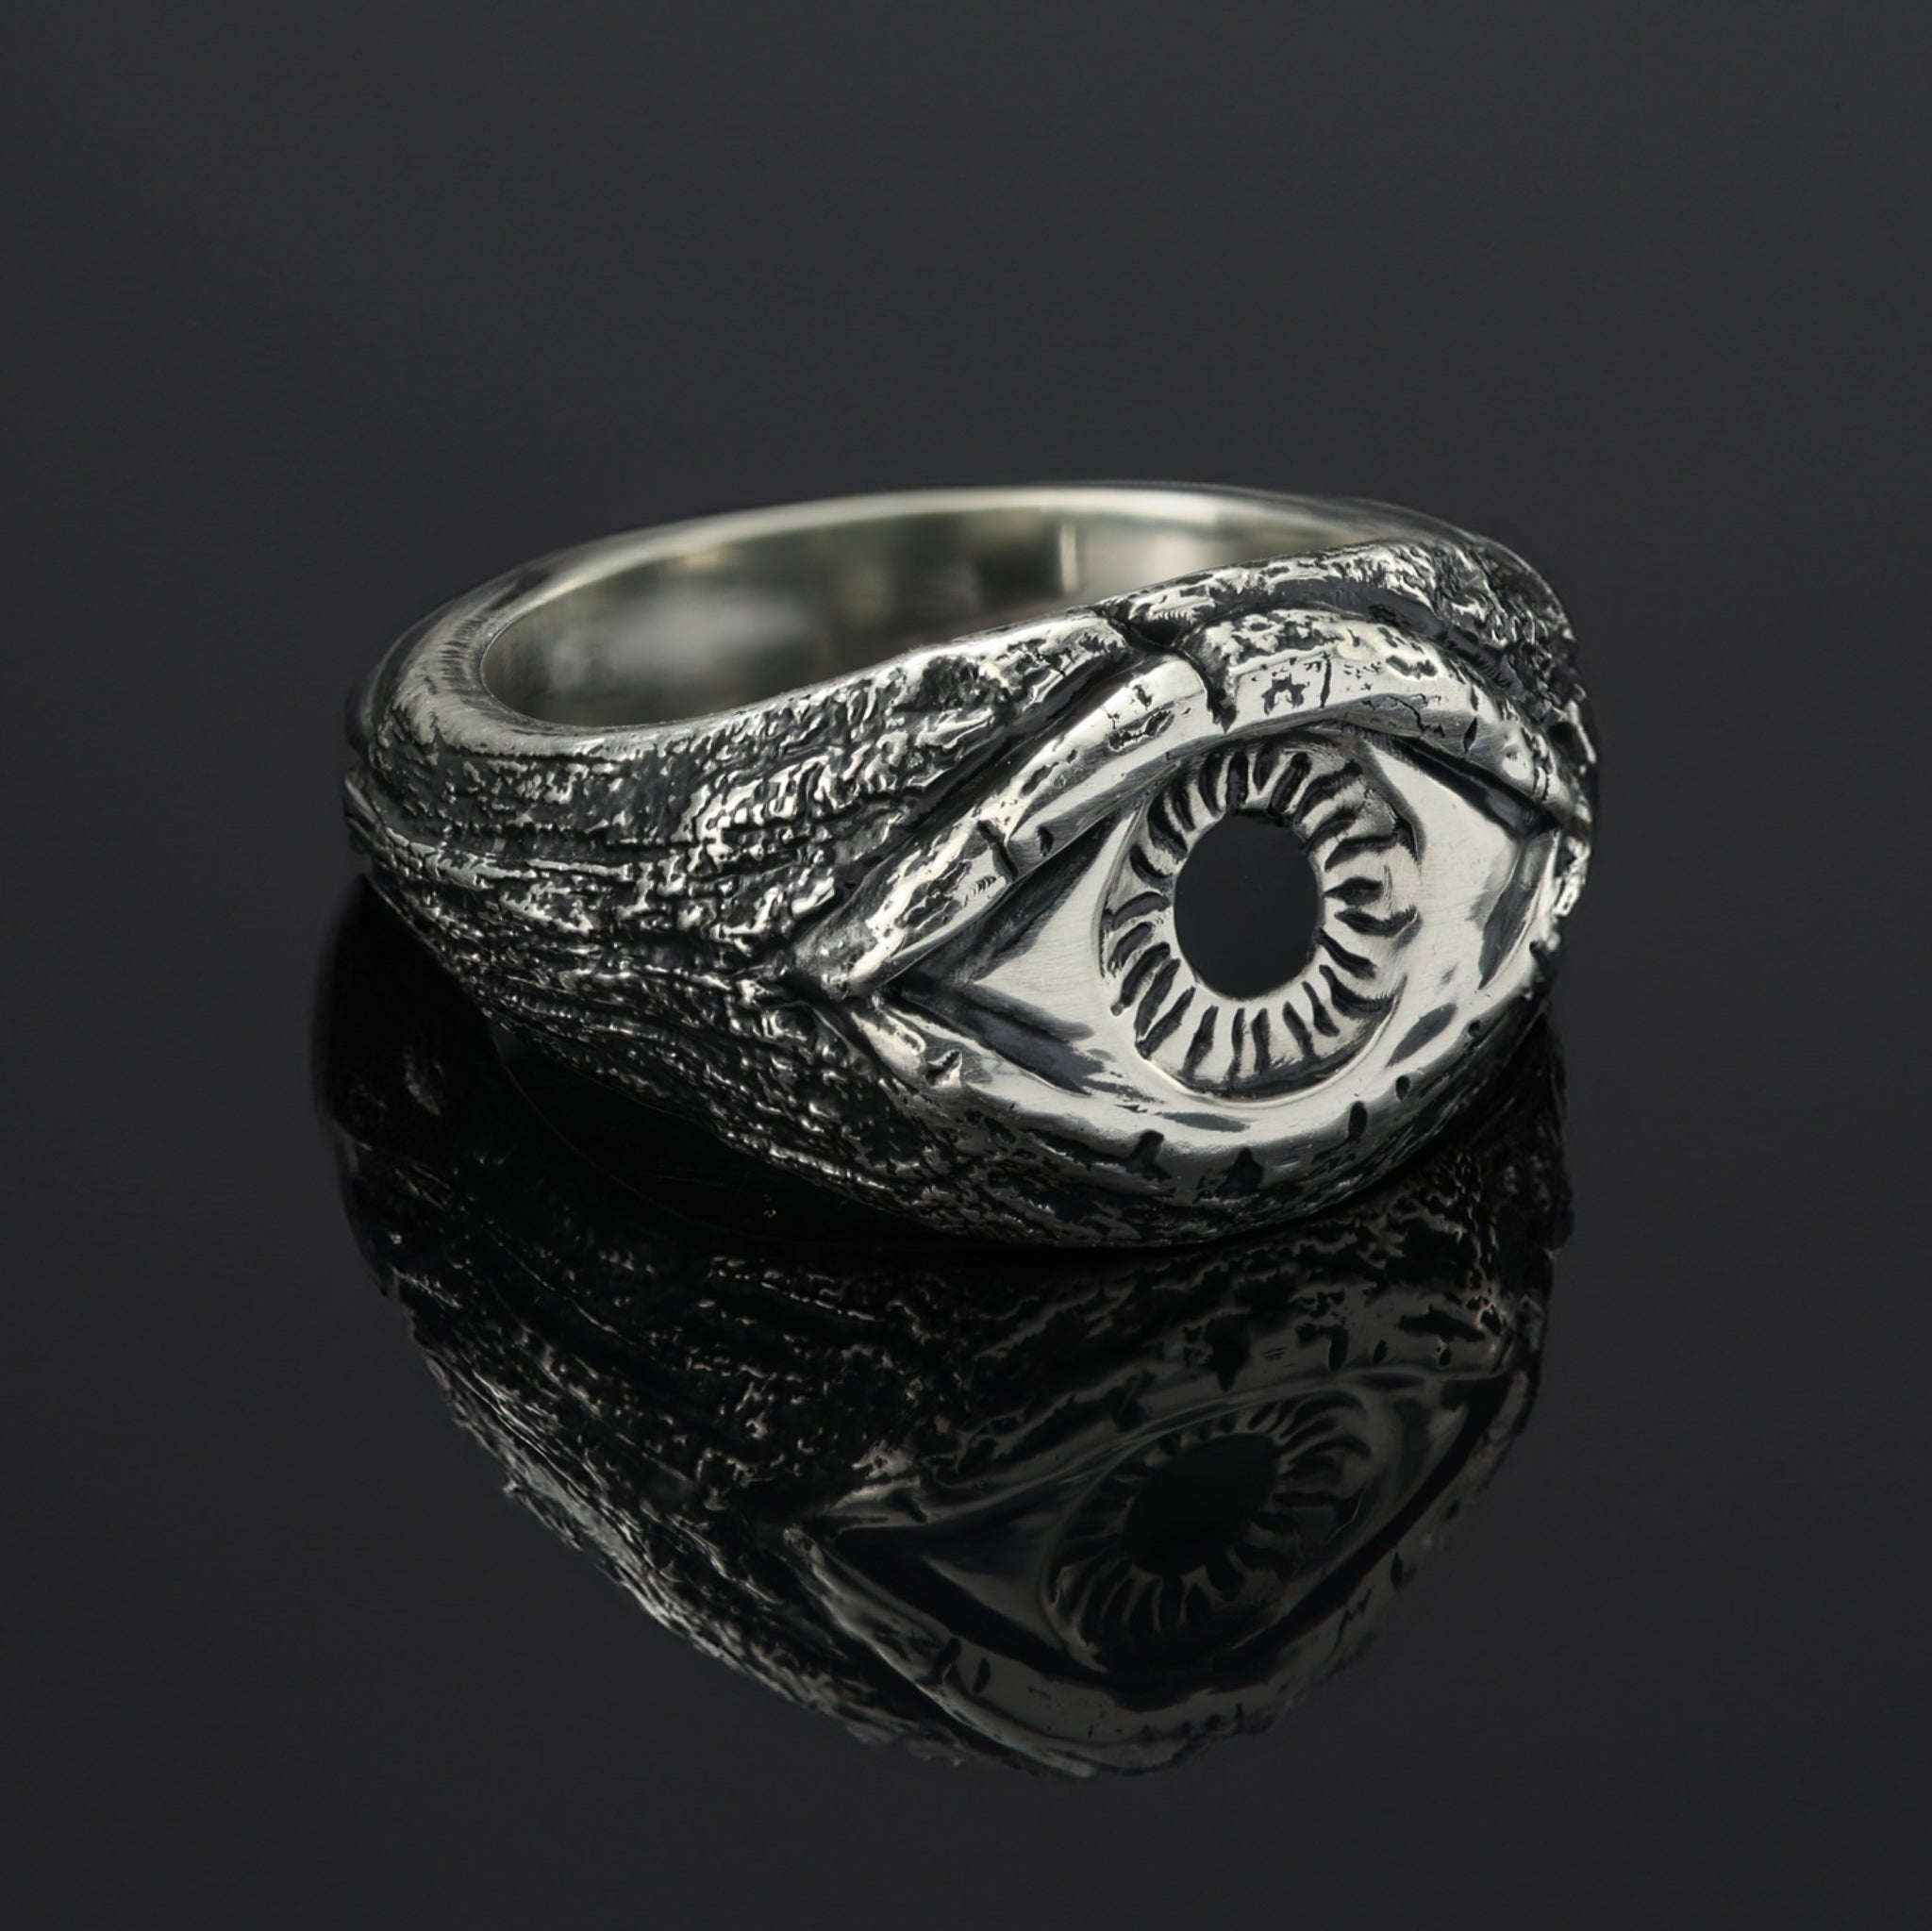 Oxidised antique finish all-seeing eye ring in 925 sterling silver.